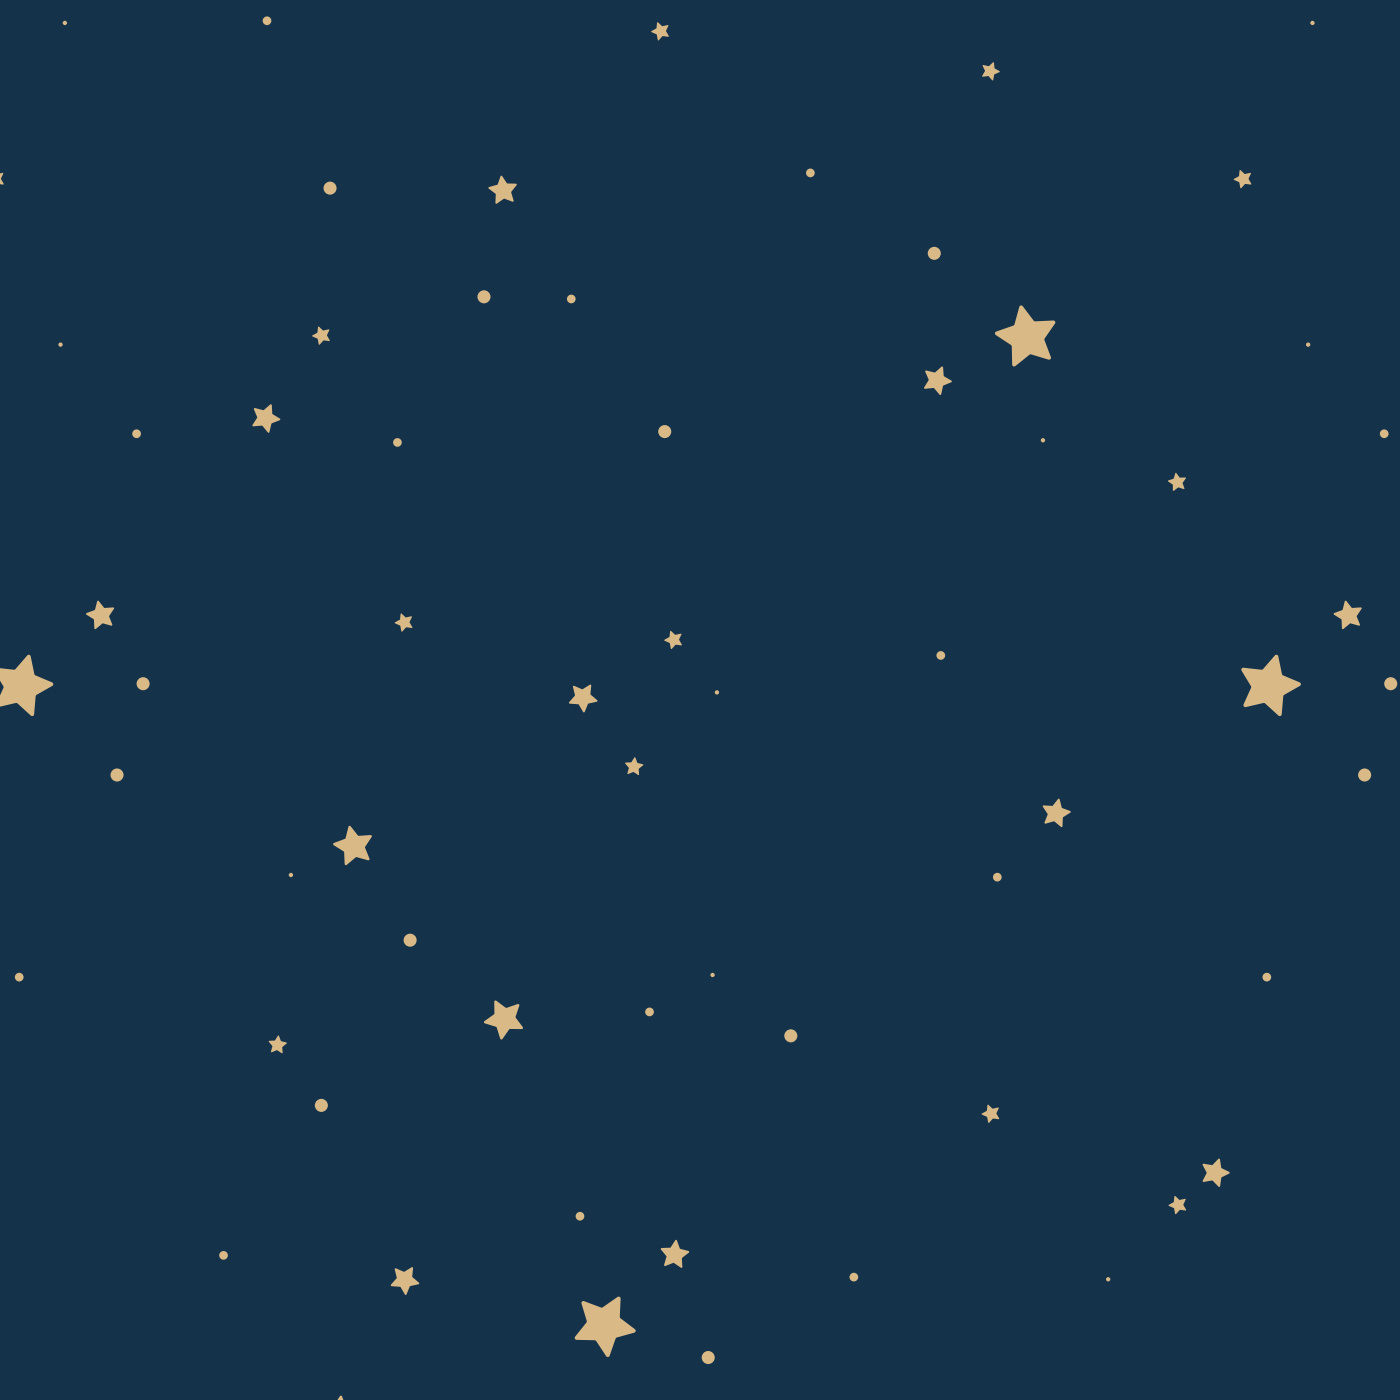 Starry Sky Peel And Stick Removable Wallpaper